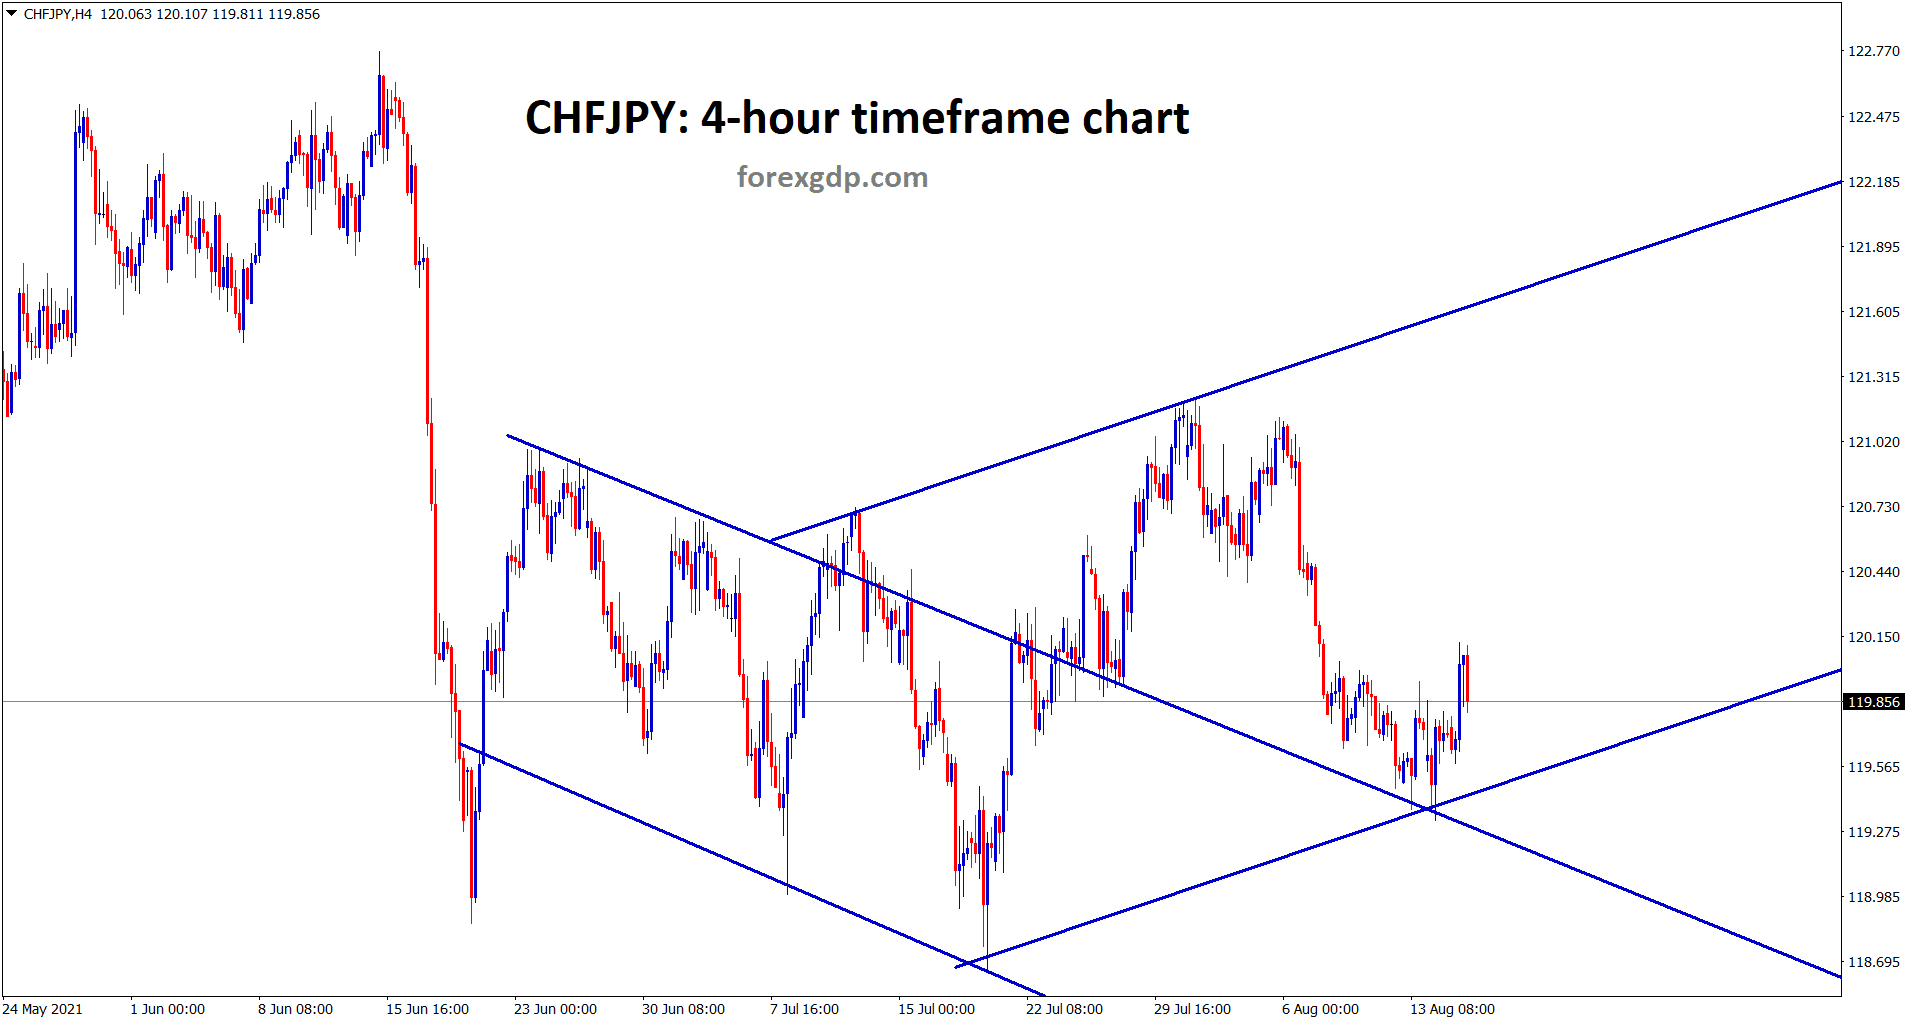 CHFJPY is moving between the channels